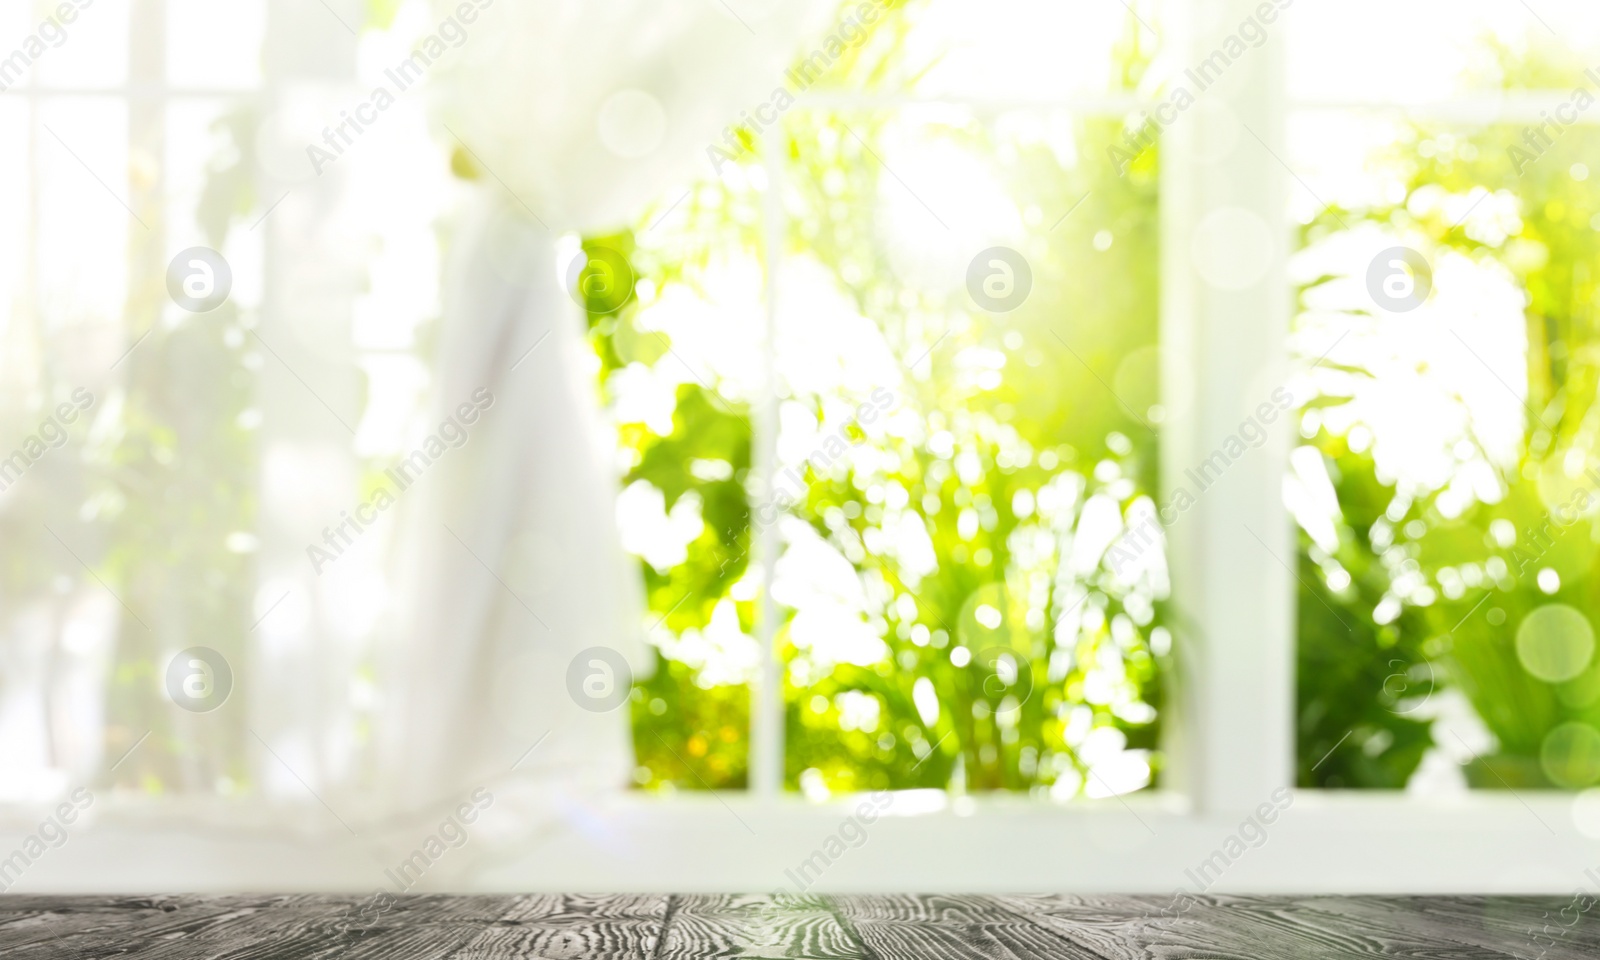 Image of Wooden table and view through window on garden in morning. Springtime